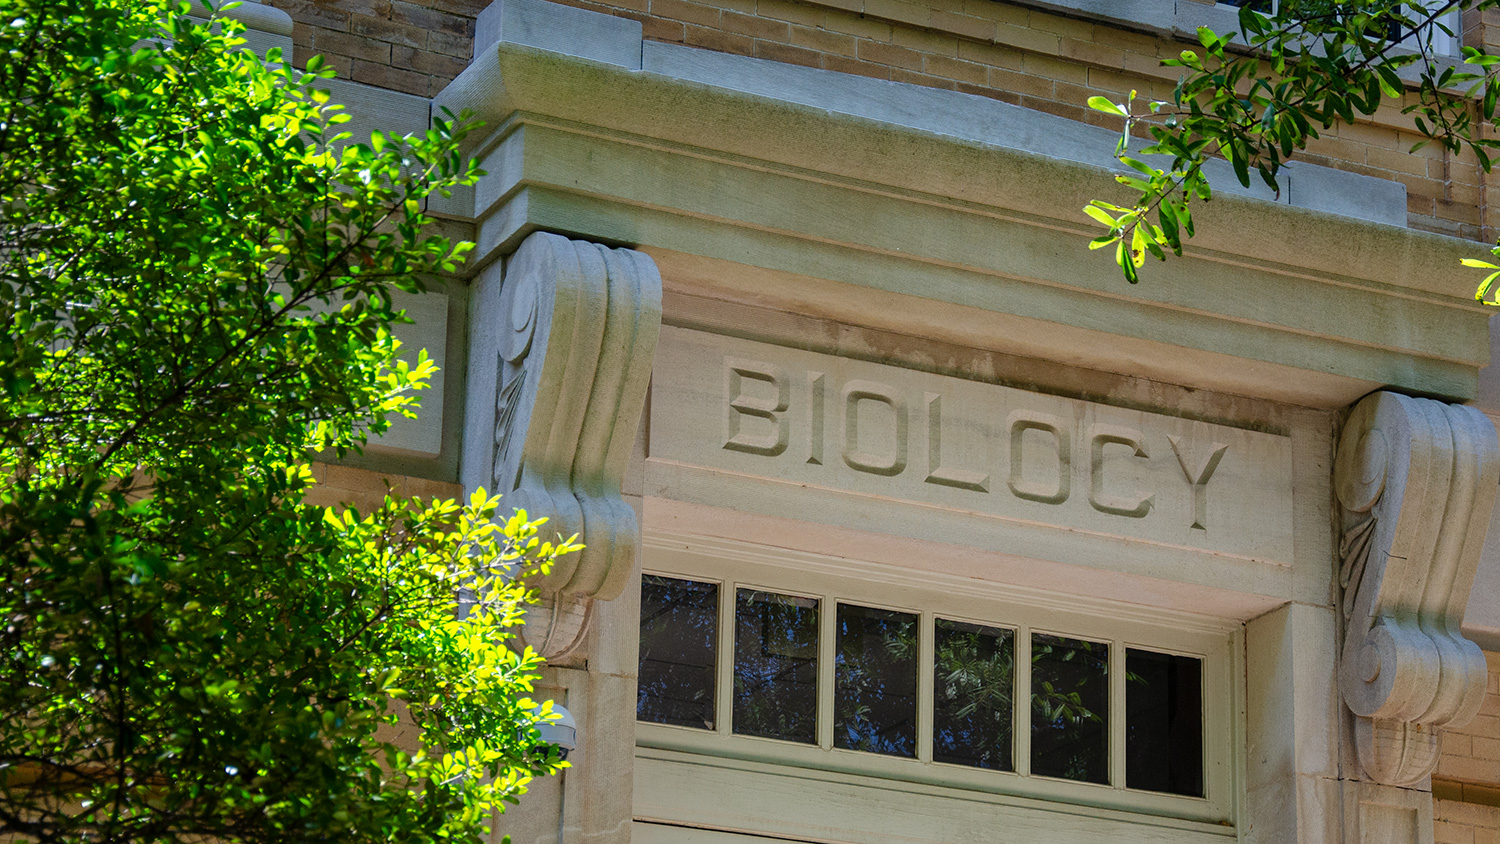 Smith Hall exterior sign that reads "Biology"